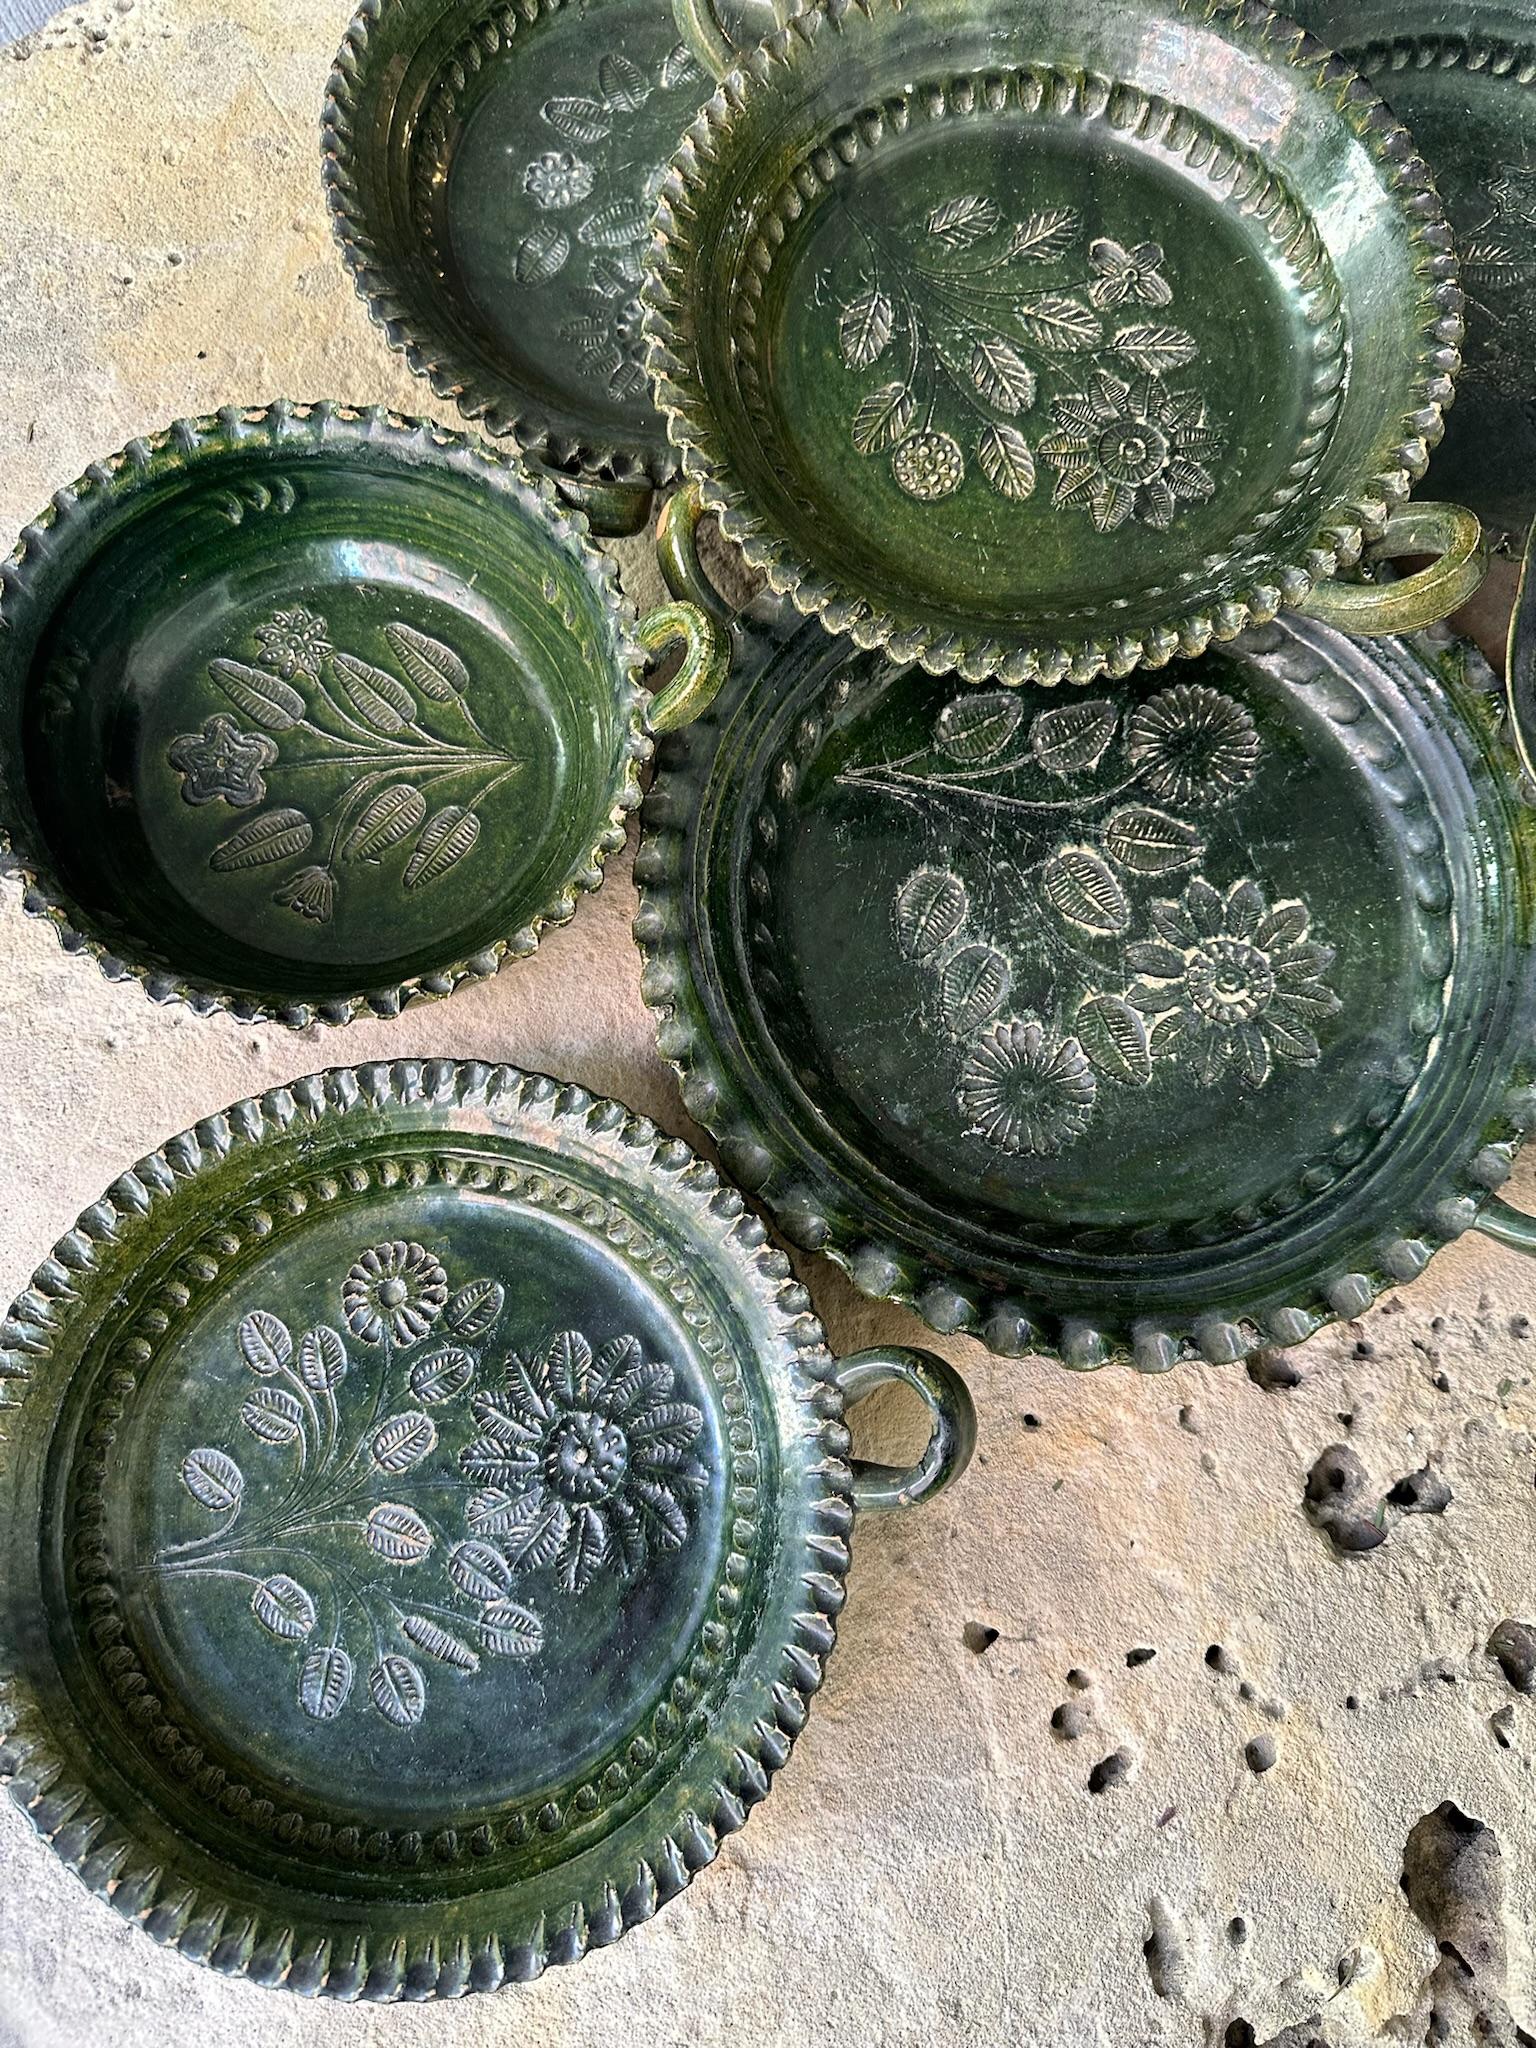 Collection of 8 Vintage Mexican Green Glaze Ceramics circa 1940s. Round ceramics with floral and leaf designs etched into the clay and etched rims with handles on each piece.
Dimensions of the 8 Pieces:
7 in L x 4 in W
3 in L x 9 in W
13 in L x 10.5